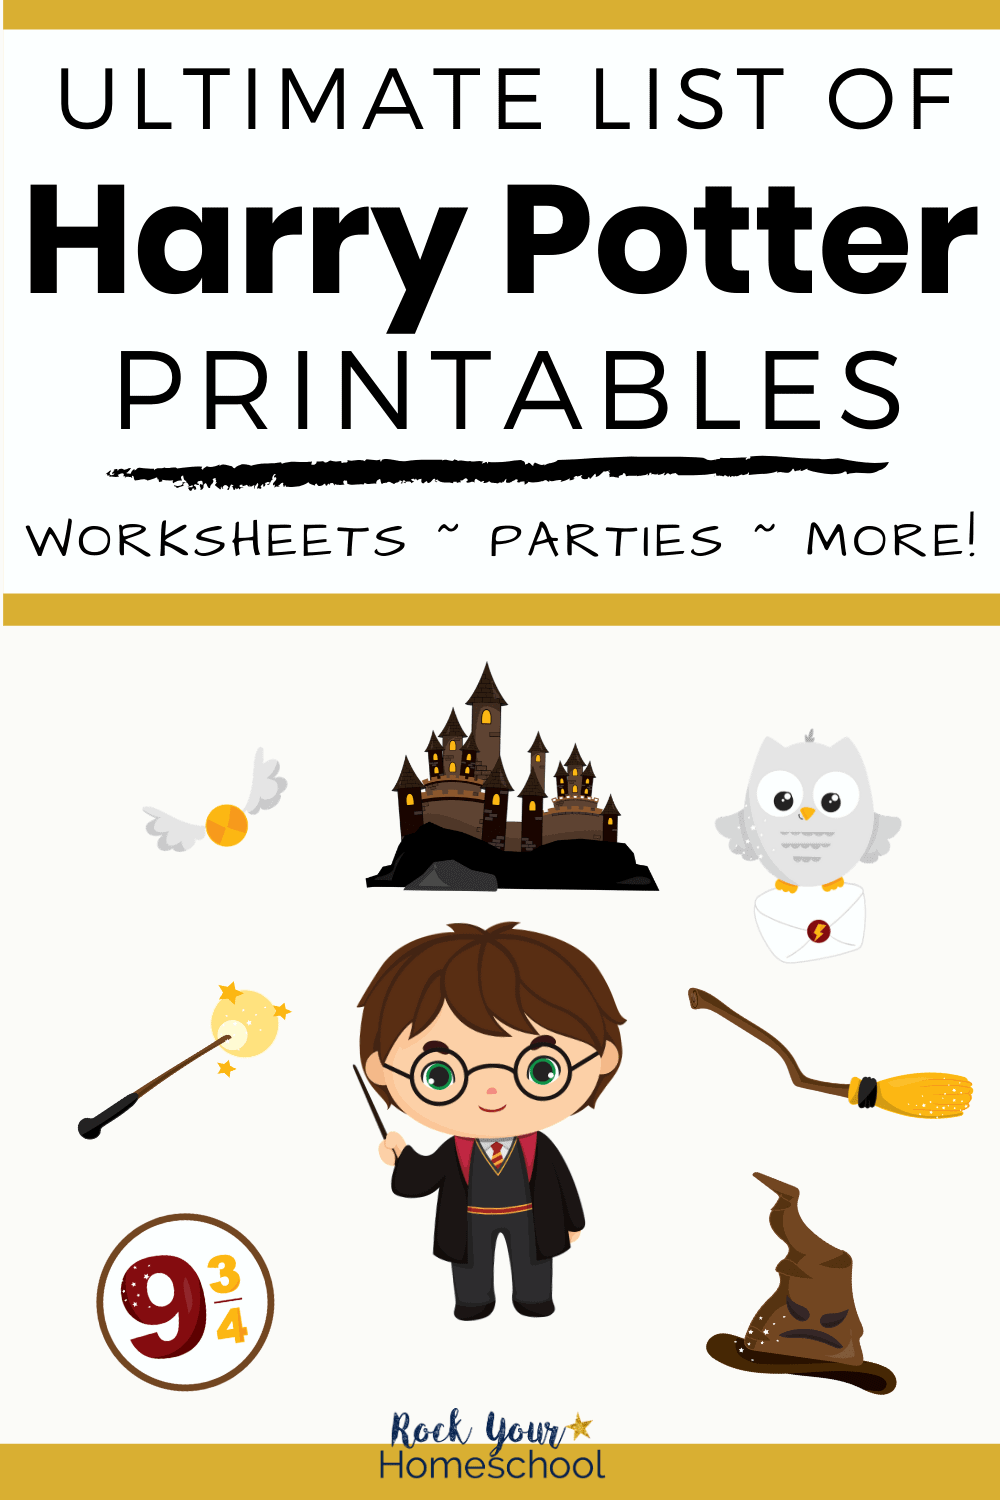 harry-potter-inspired-printables-free-the-ultimate-list-for-magical-fun